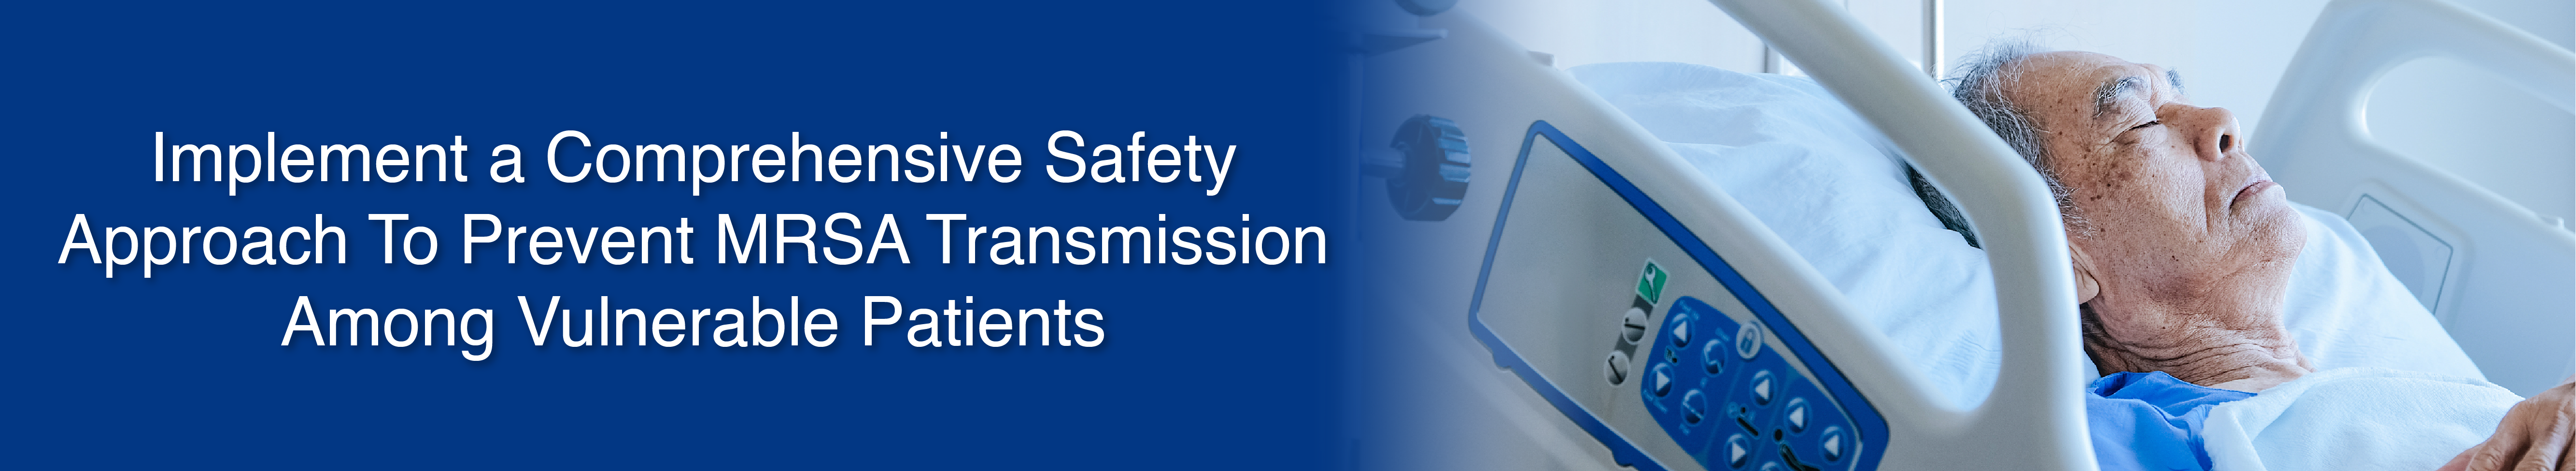 Implement a Comprehensive Safety Approach banner